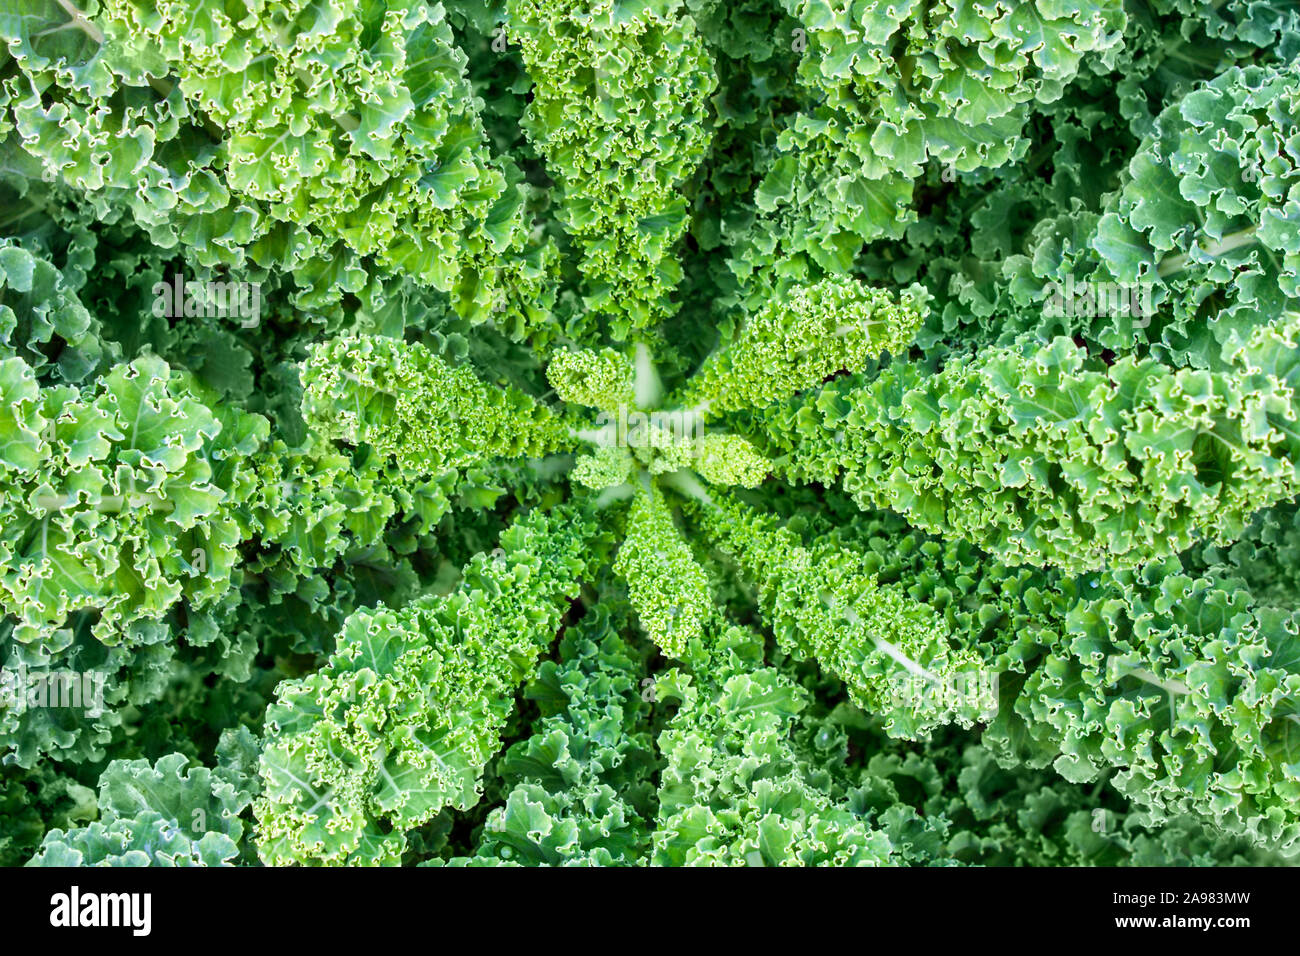 Green Cabbage Kale Stock Photo